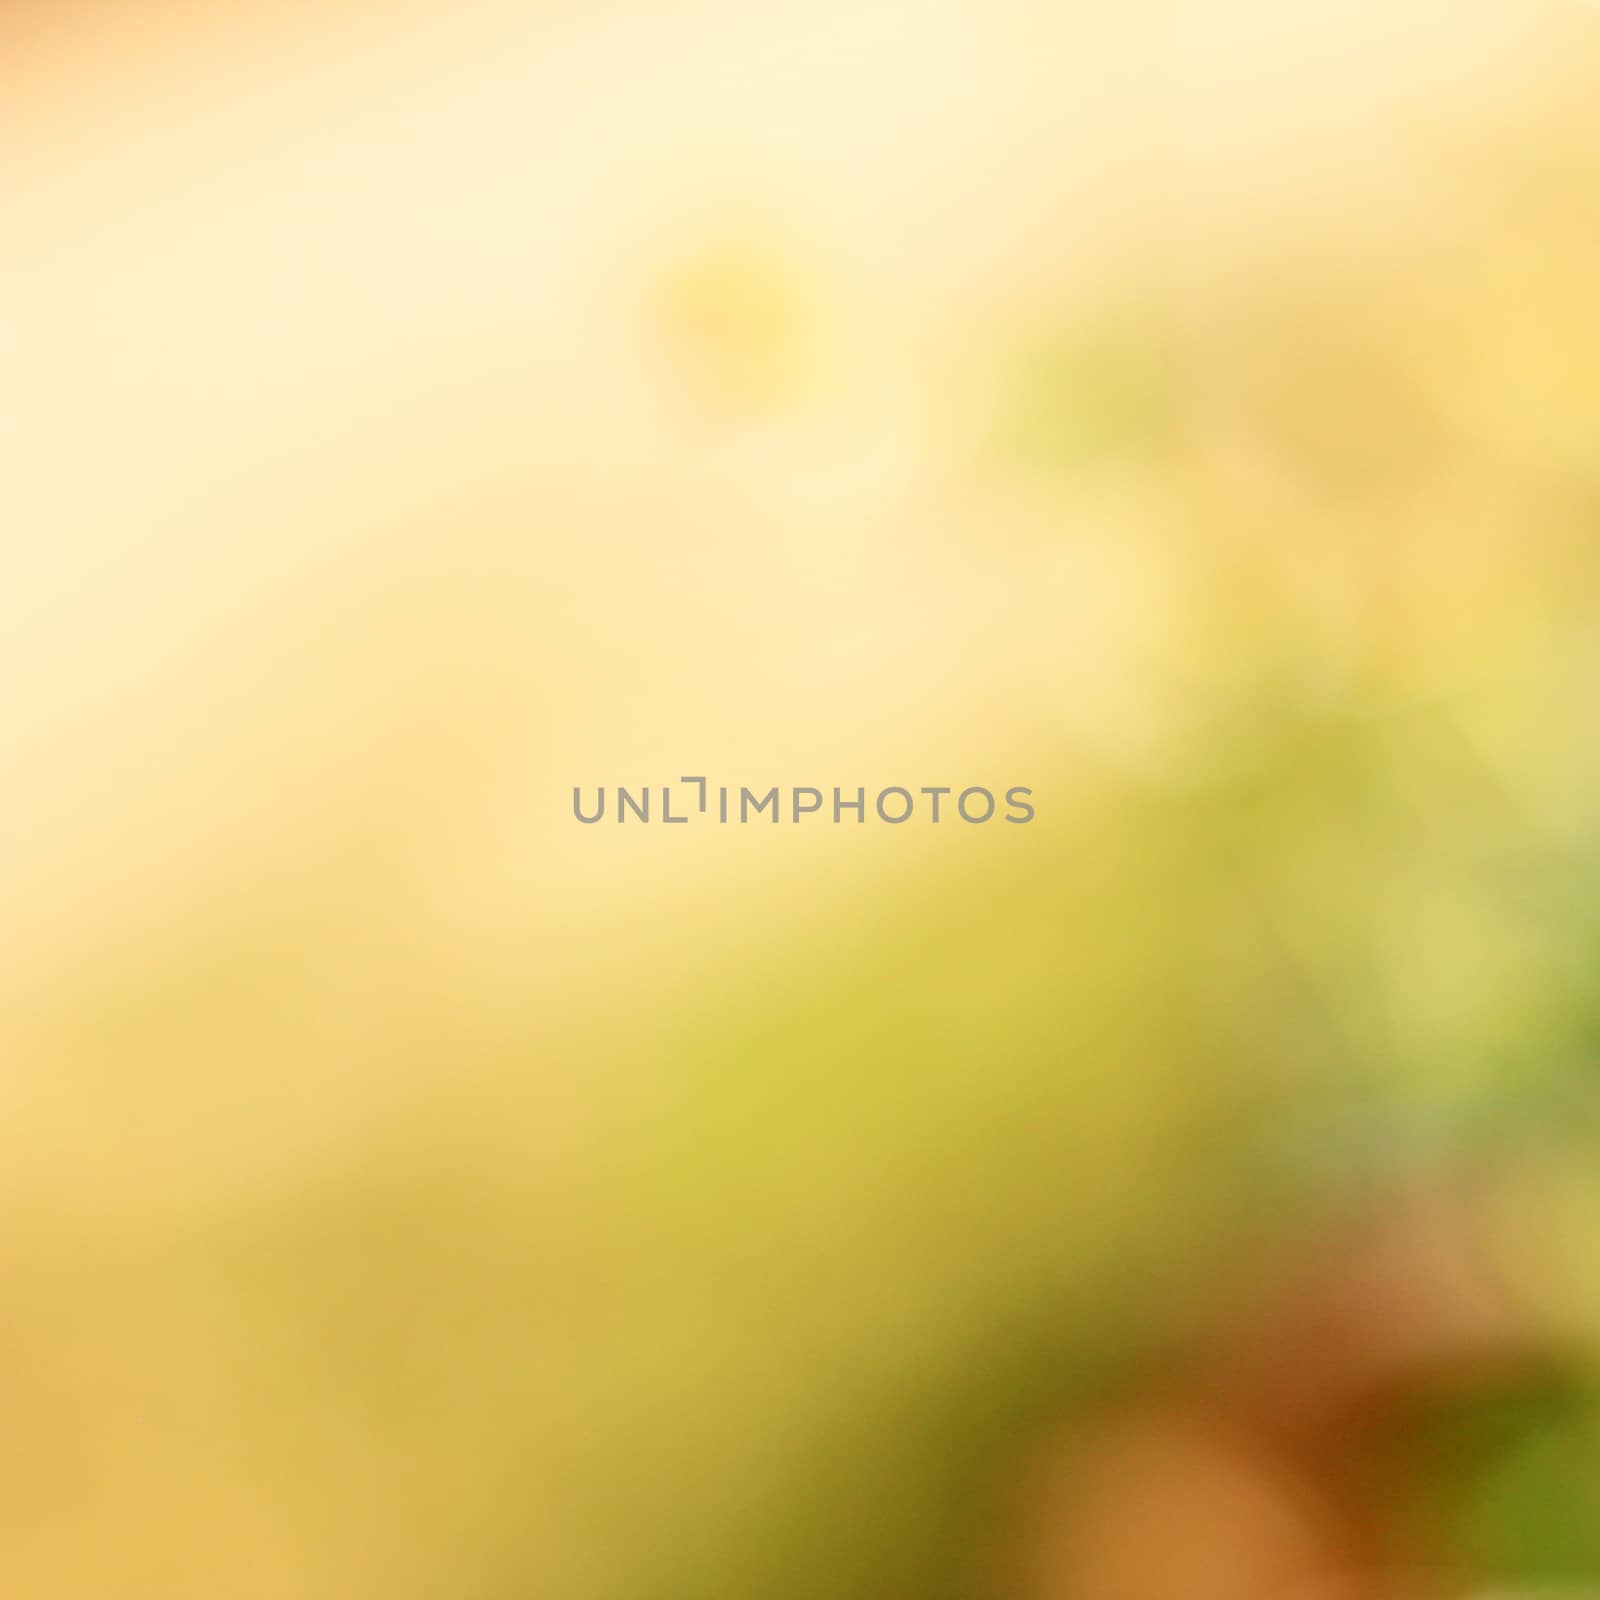 Abstract background with bokeh defocused lights  